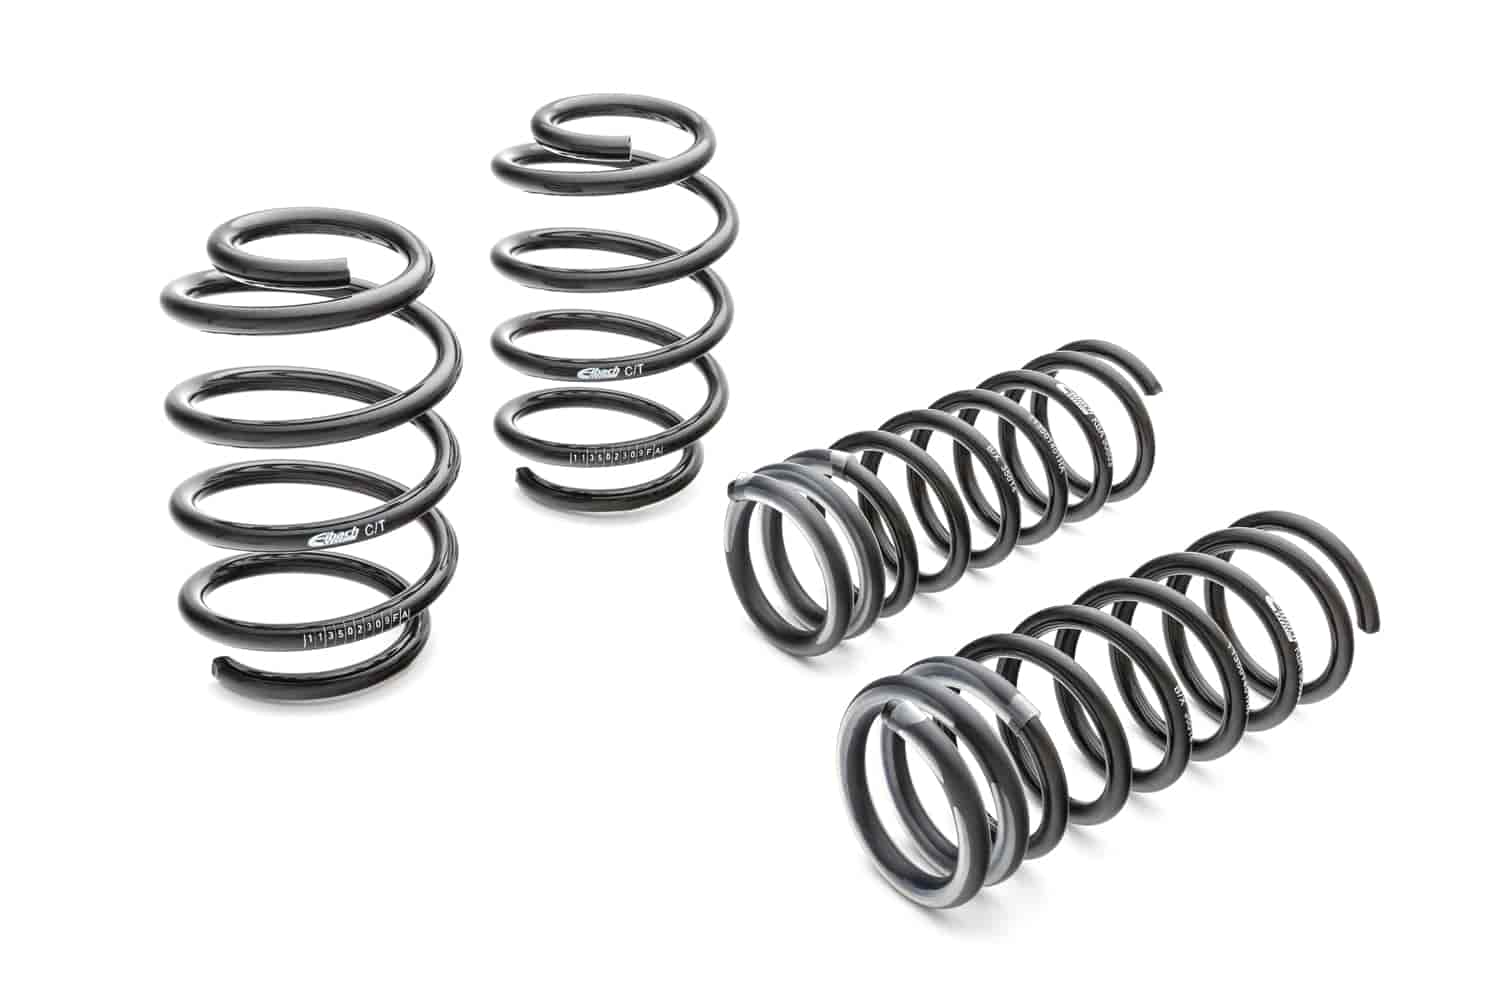 E10-20-030-01-22 Pro-Kit Lowering Springs 2014-2016 BMW 228i - 1.200 in. Front/.800 in. Rear Drop